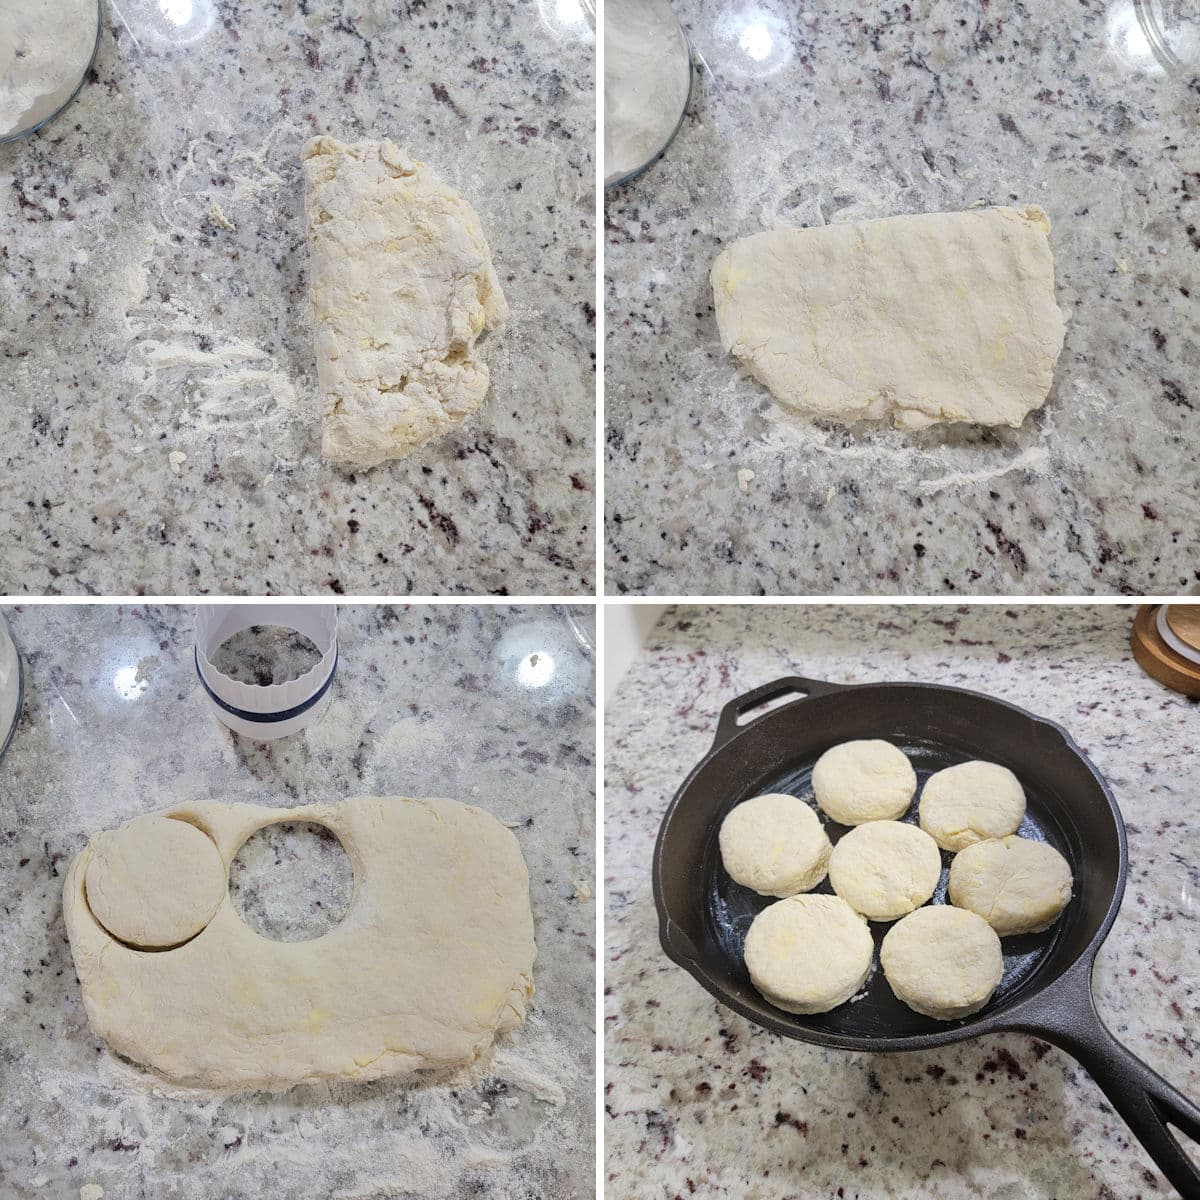 Folding biscuit dough and cutting out round biscuits.